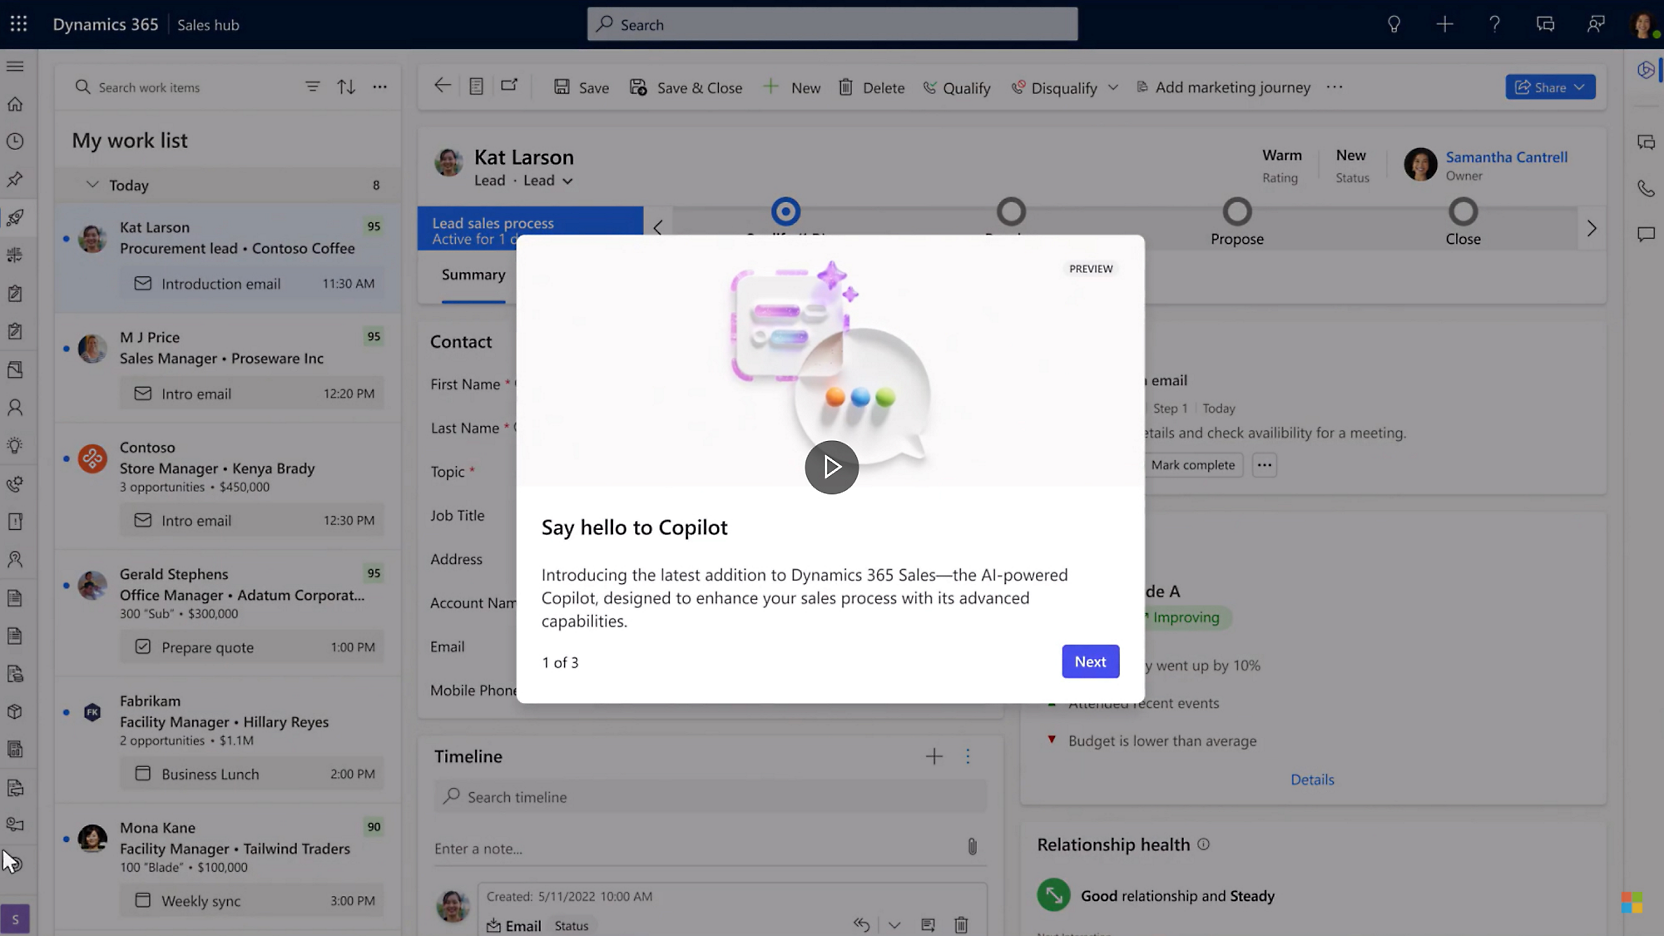 A screen shot of the Dynamics 365 dashboard and pop up for Copilot is opened